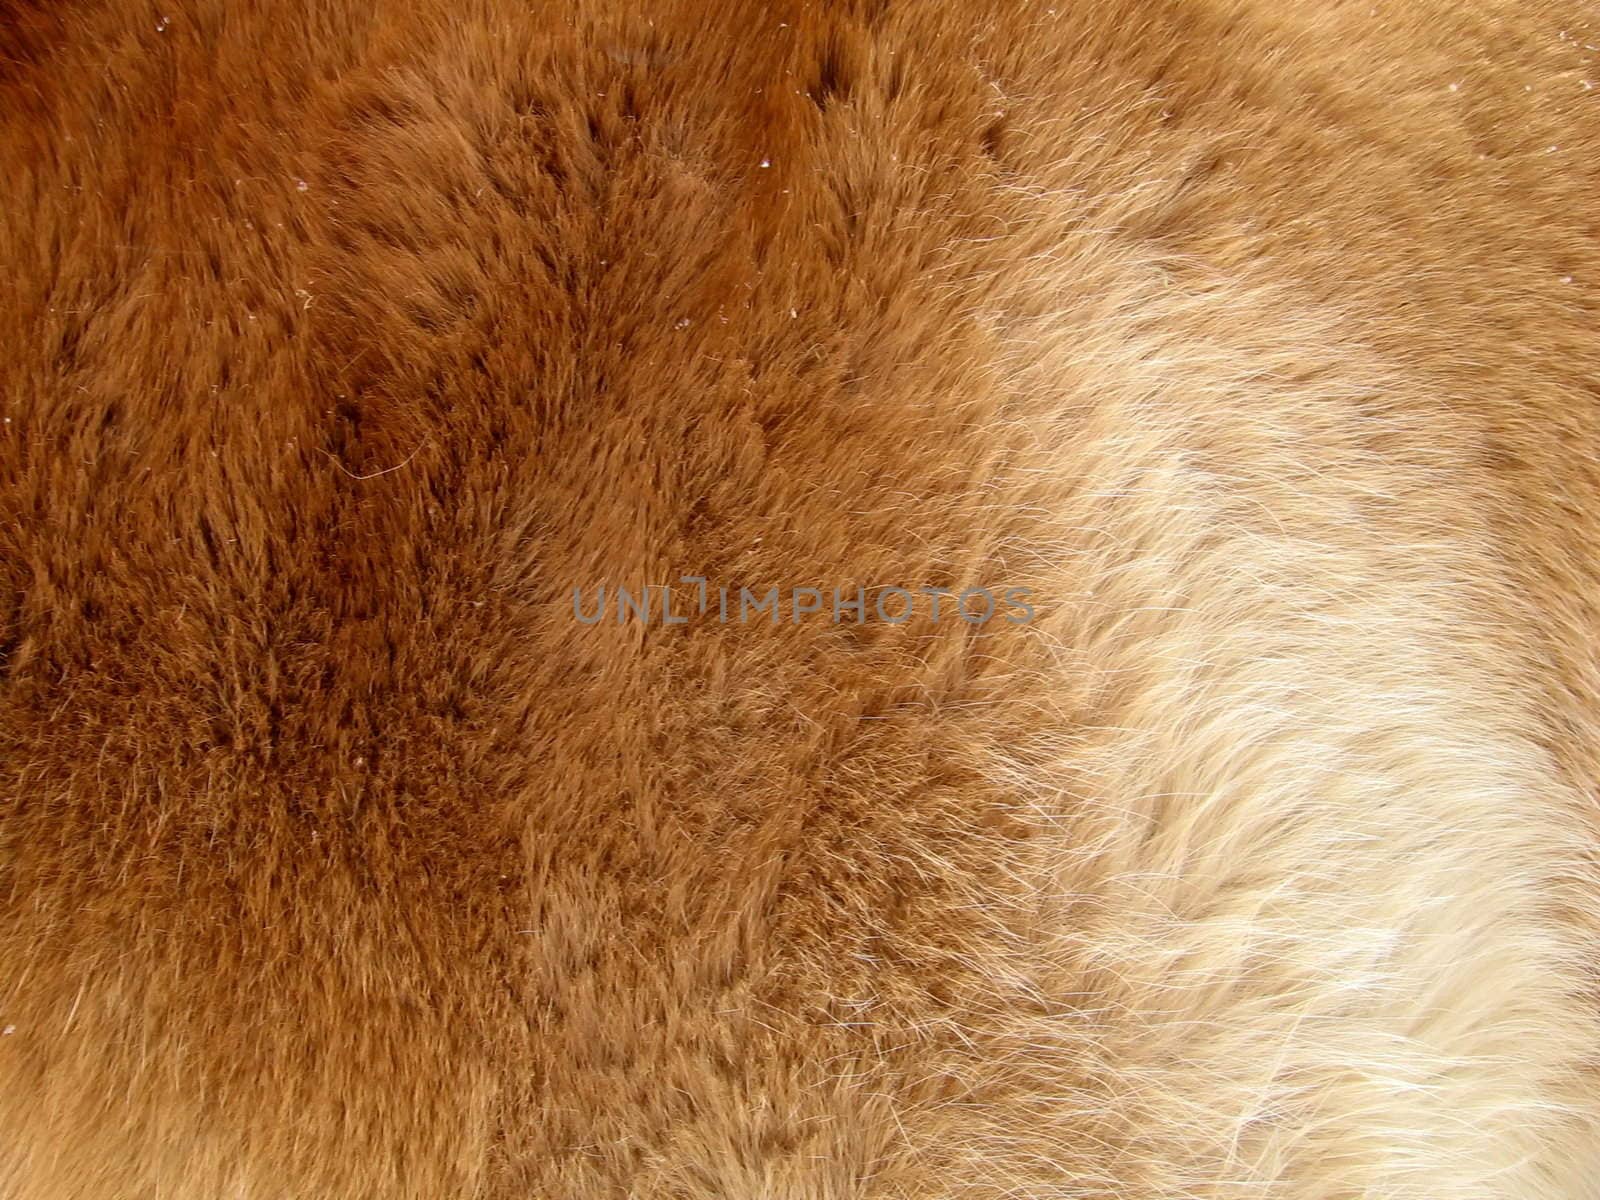 Abstract background of an orange fur of a horse